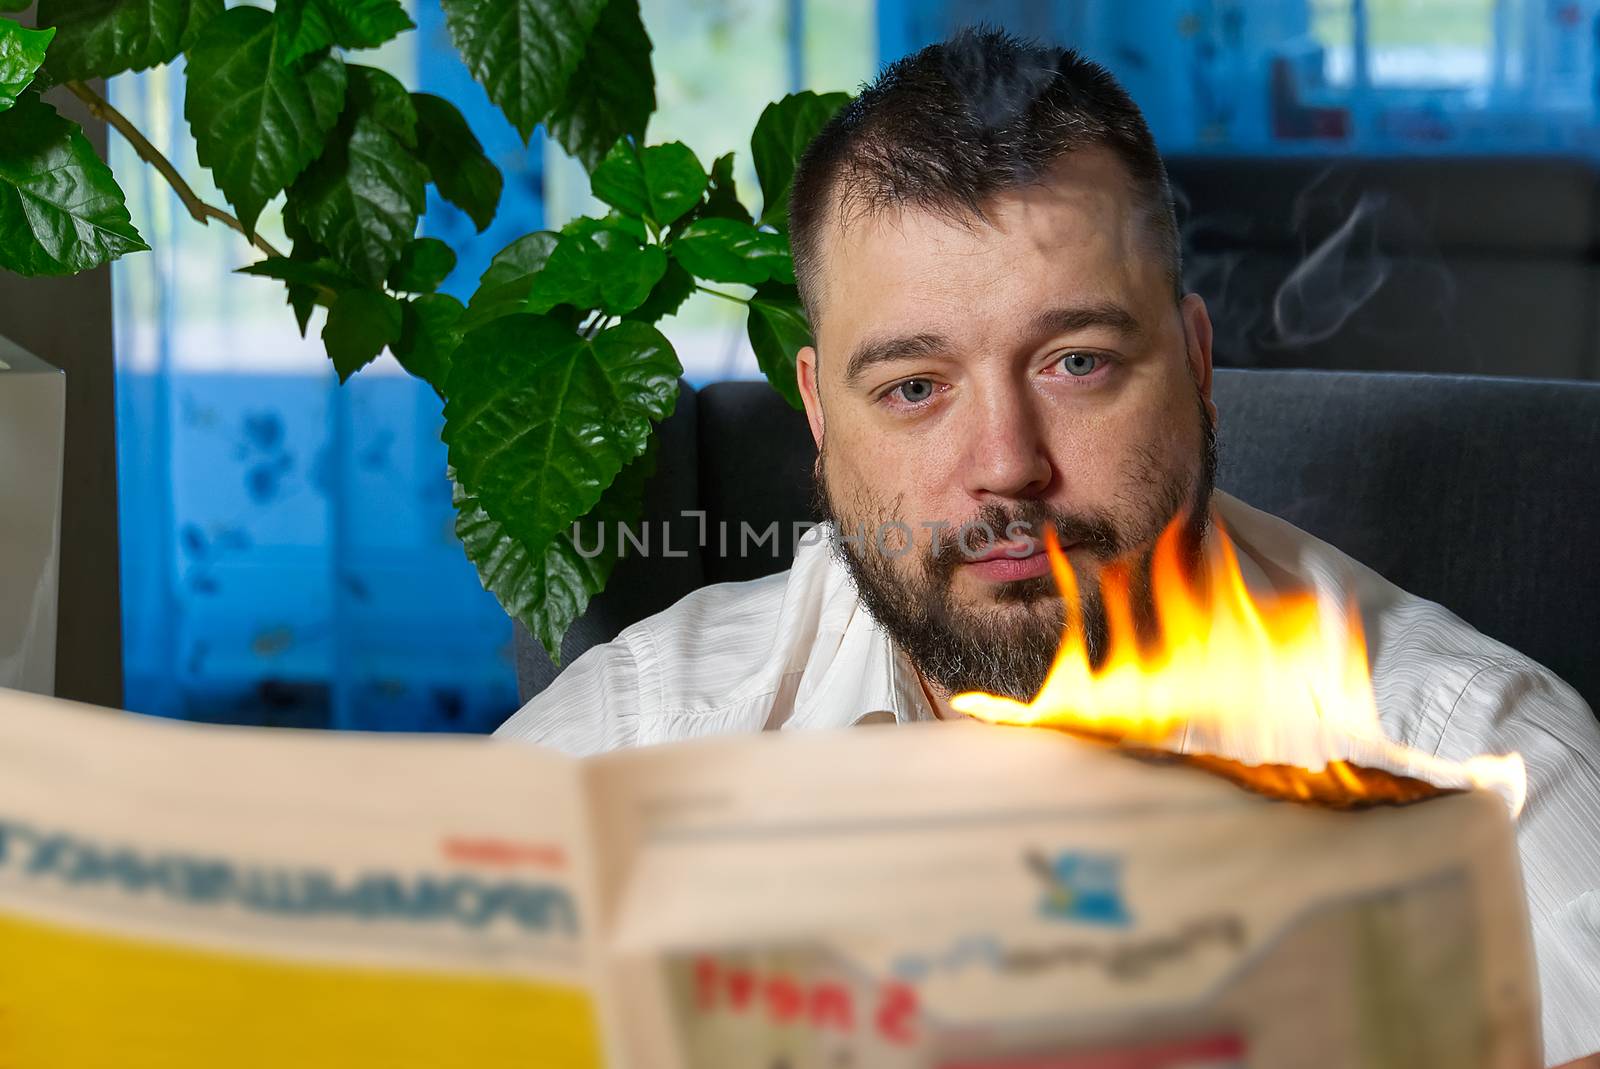 Man reading news in burning newspaper. Burning magazine, newspaper in mae hands. fake news, breaking news concept by PhotoTime